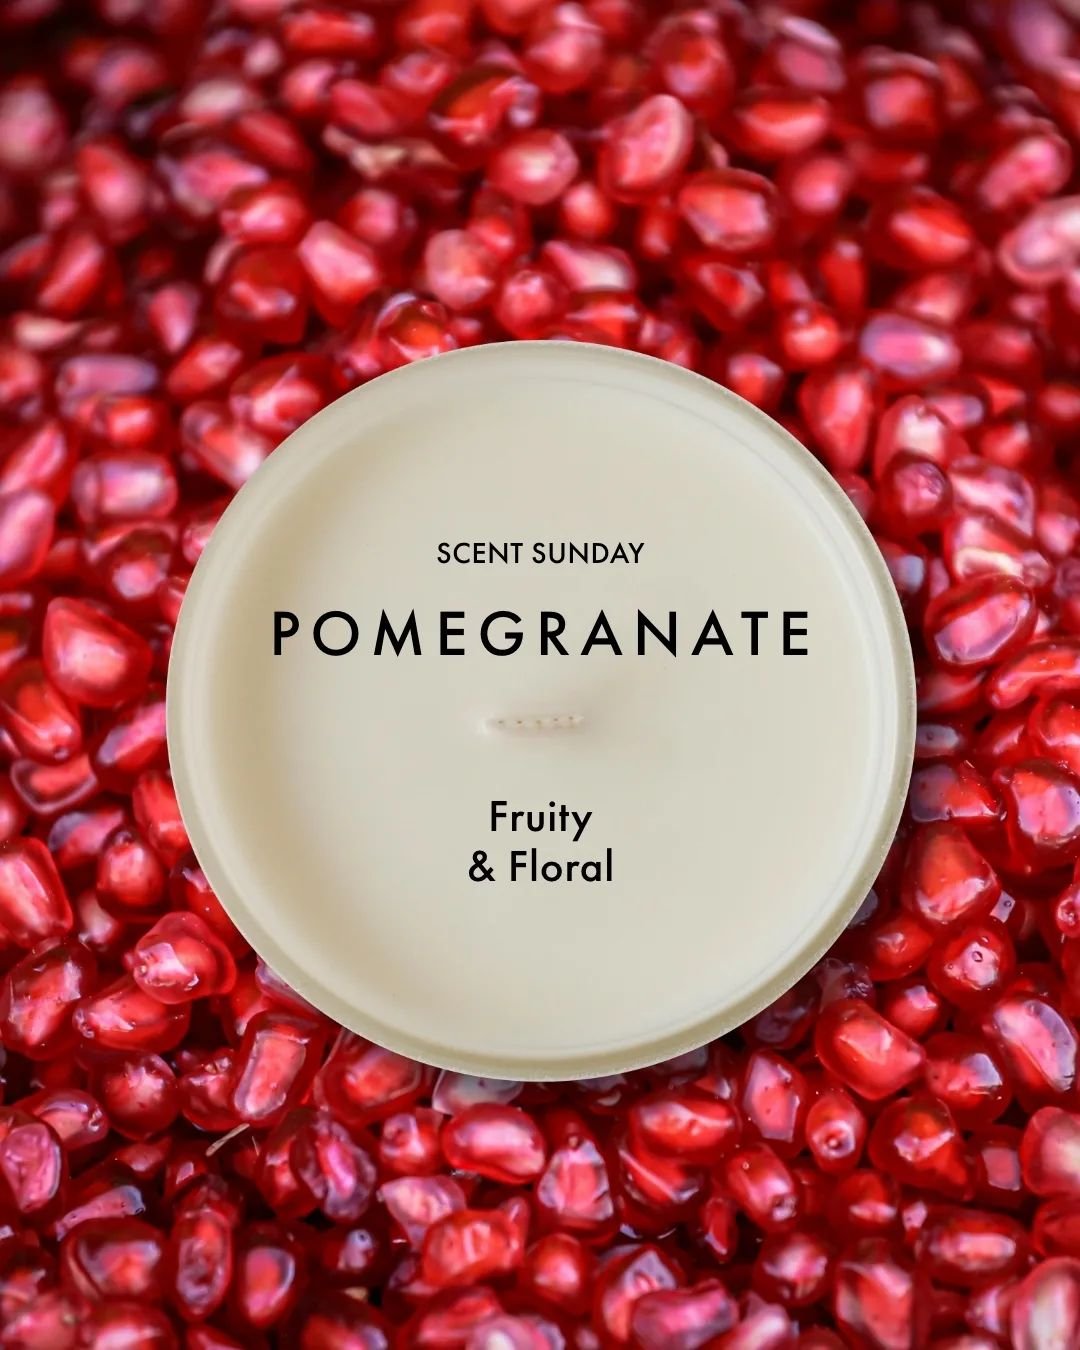 Another Scent Sunday for you - this time we're looking at Pomegranate, and we've certainly got the weather for this floral, fruity fragrance ☀️🌸🍓.

With top notes of pink peppercorns and lime, and base notes of tobacco and amber, Pomegranate is a m